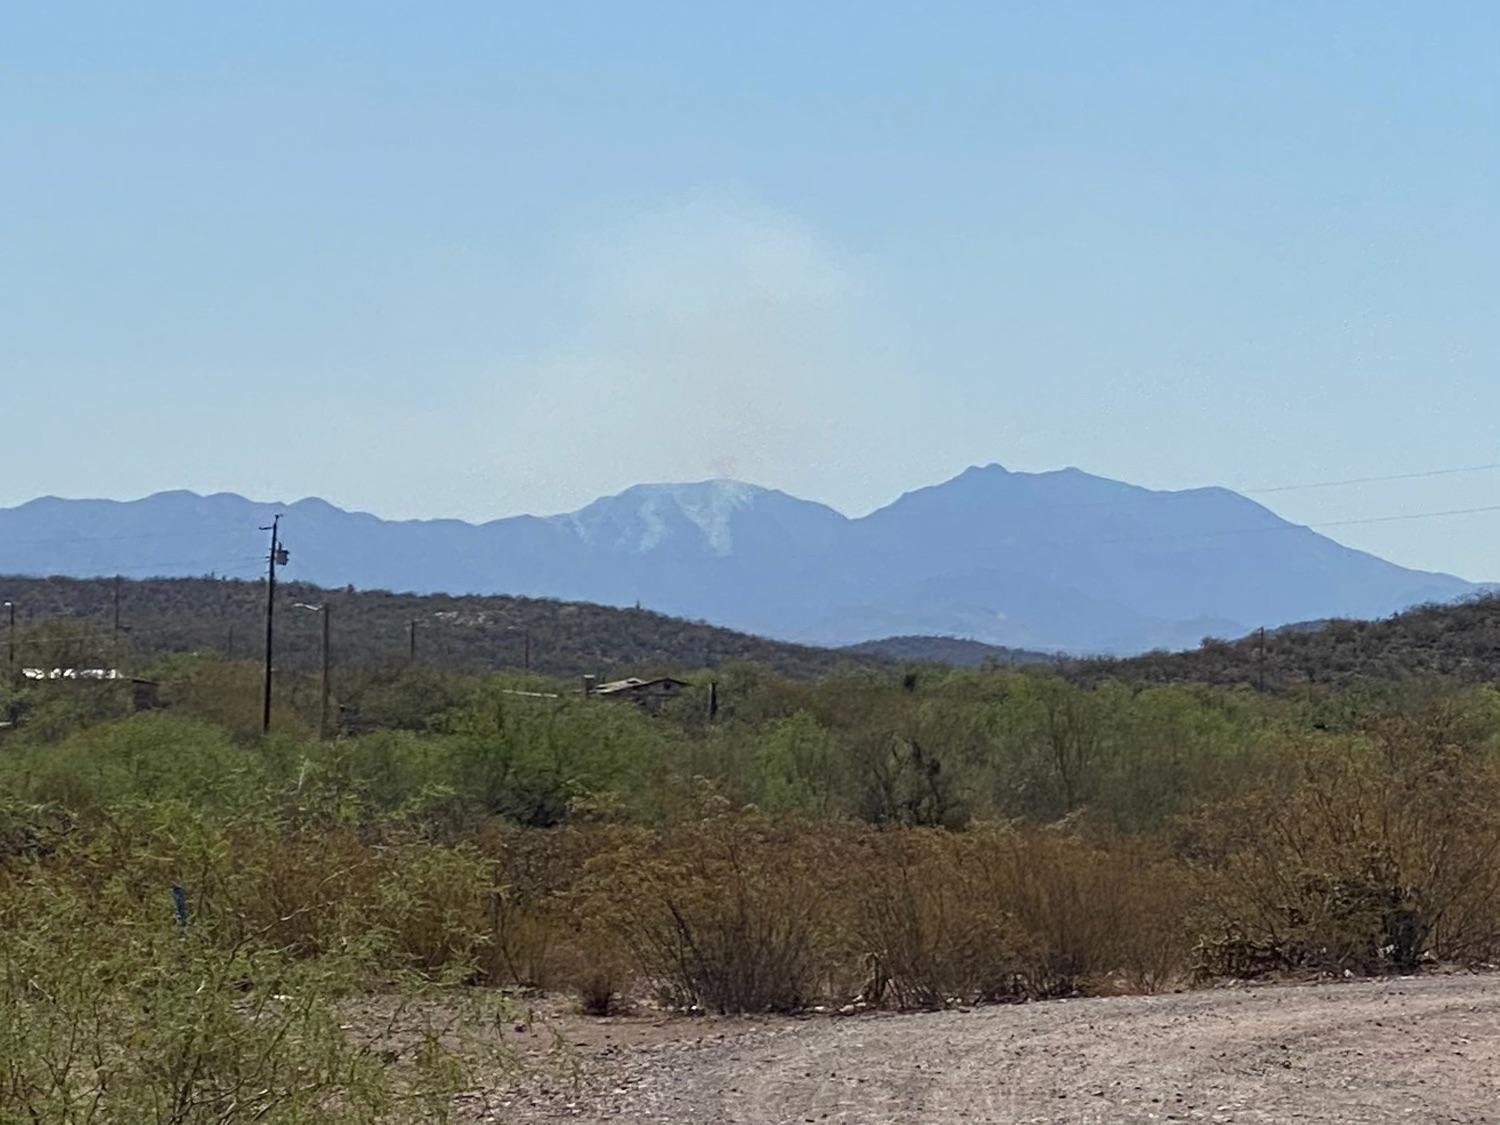 A house is surrounded by desert vegetation with smoke coming up from center of picture in the background.